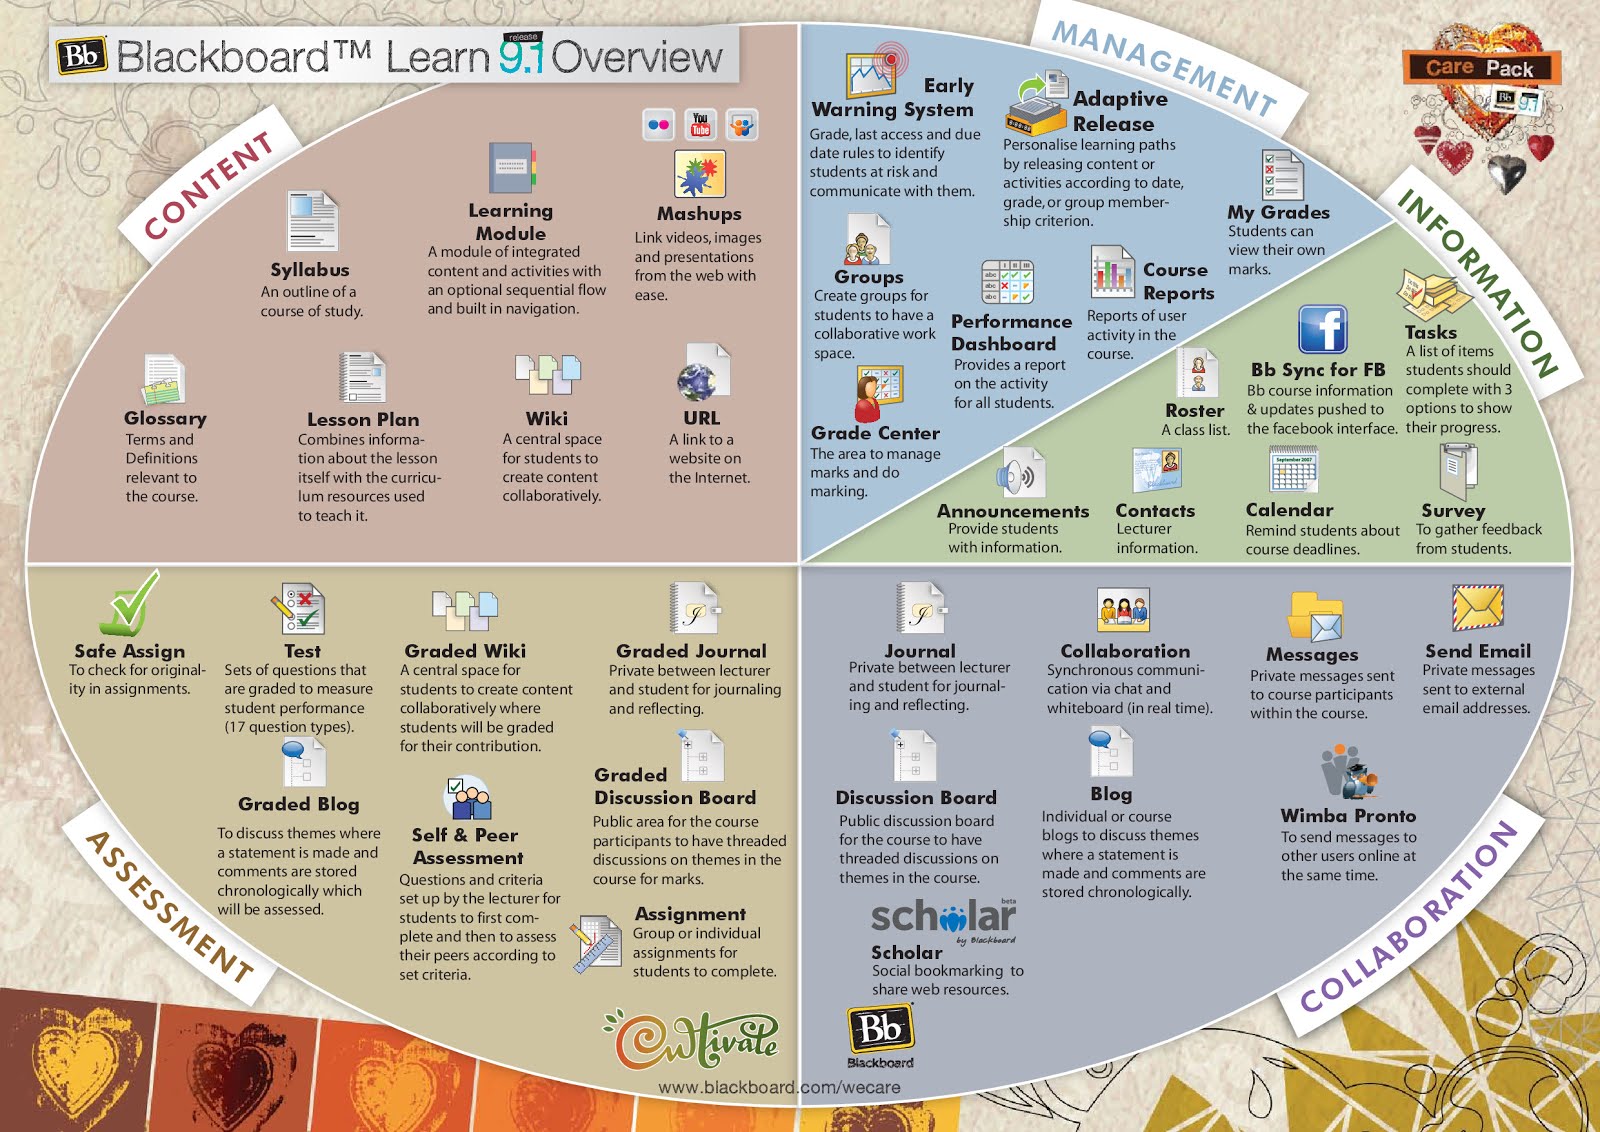 bb-learn-overview.jpg